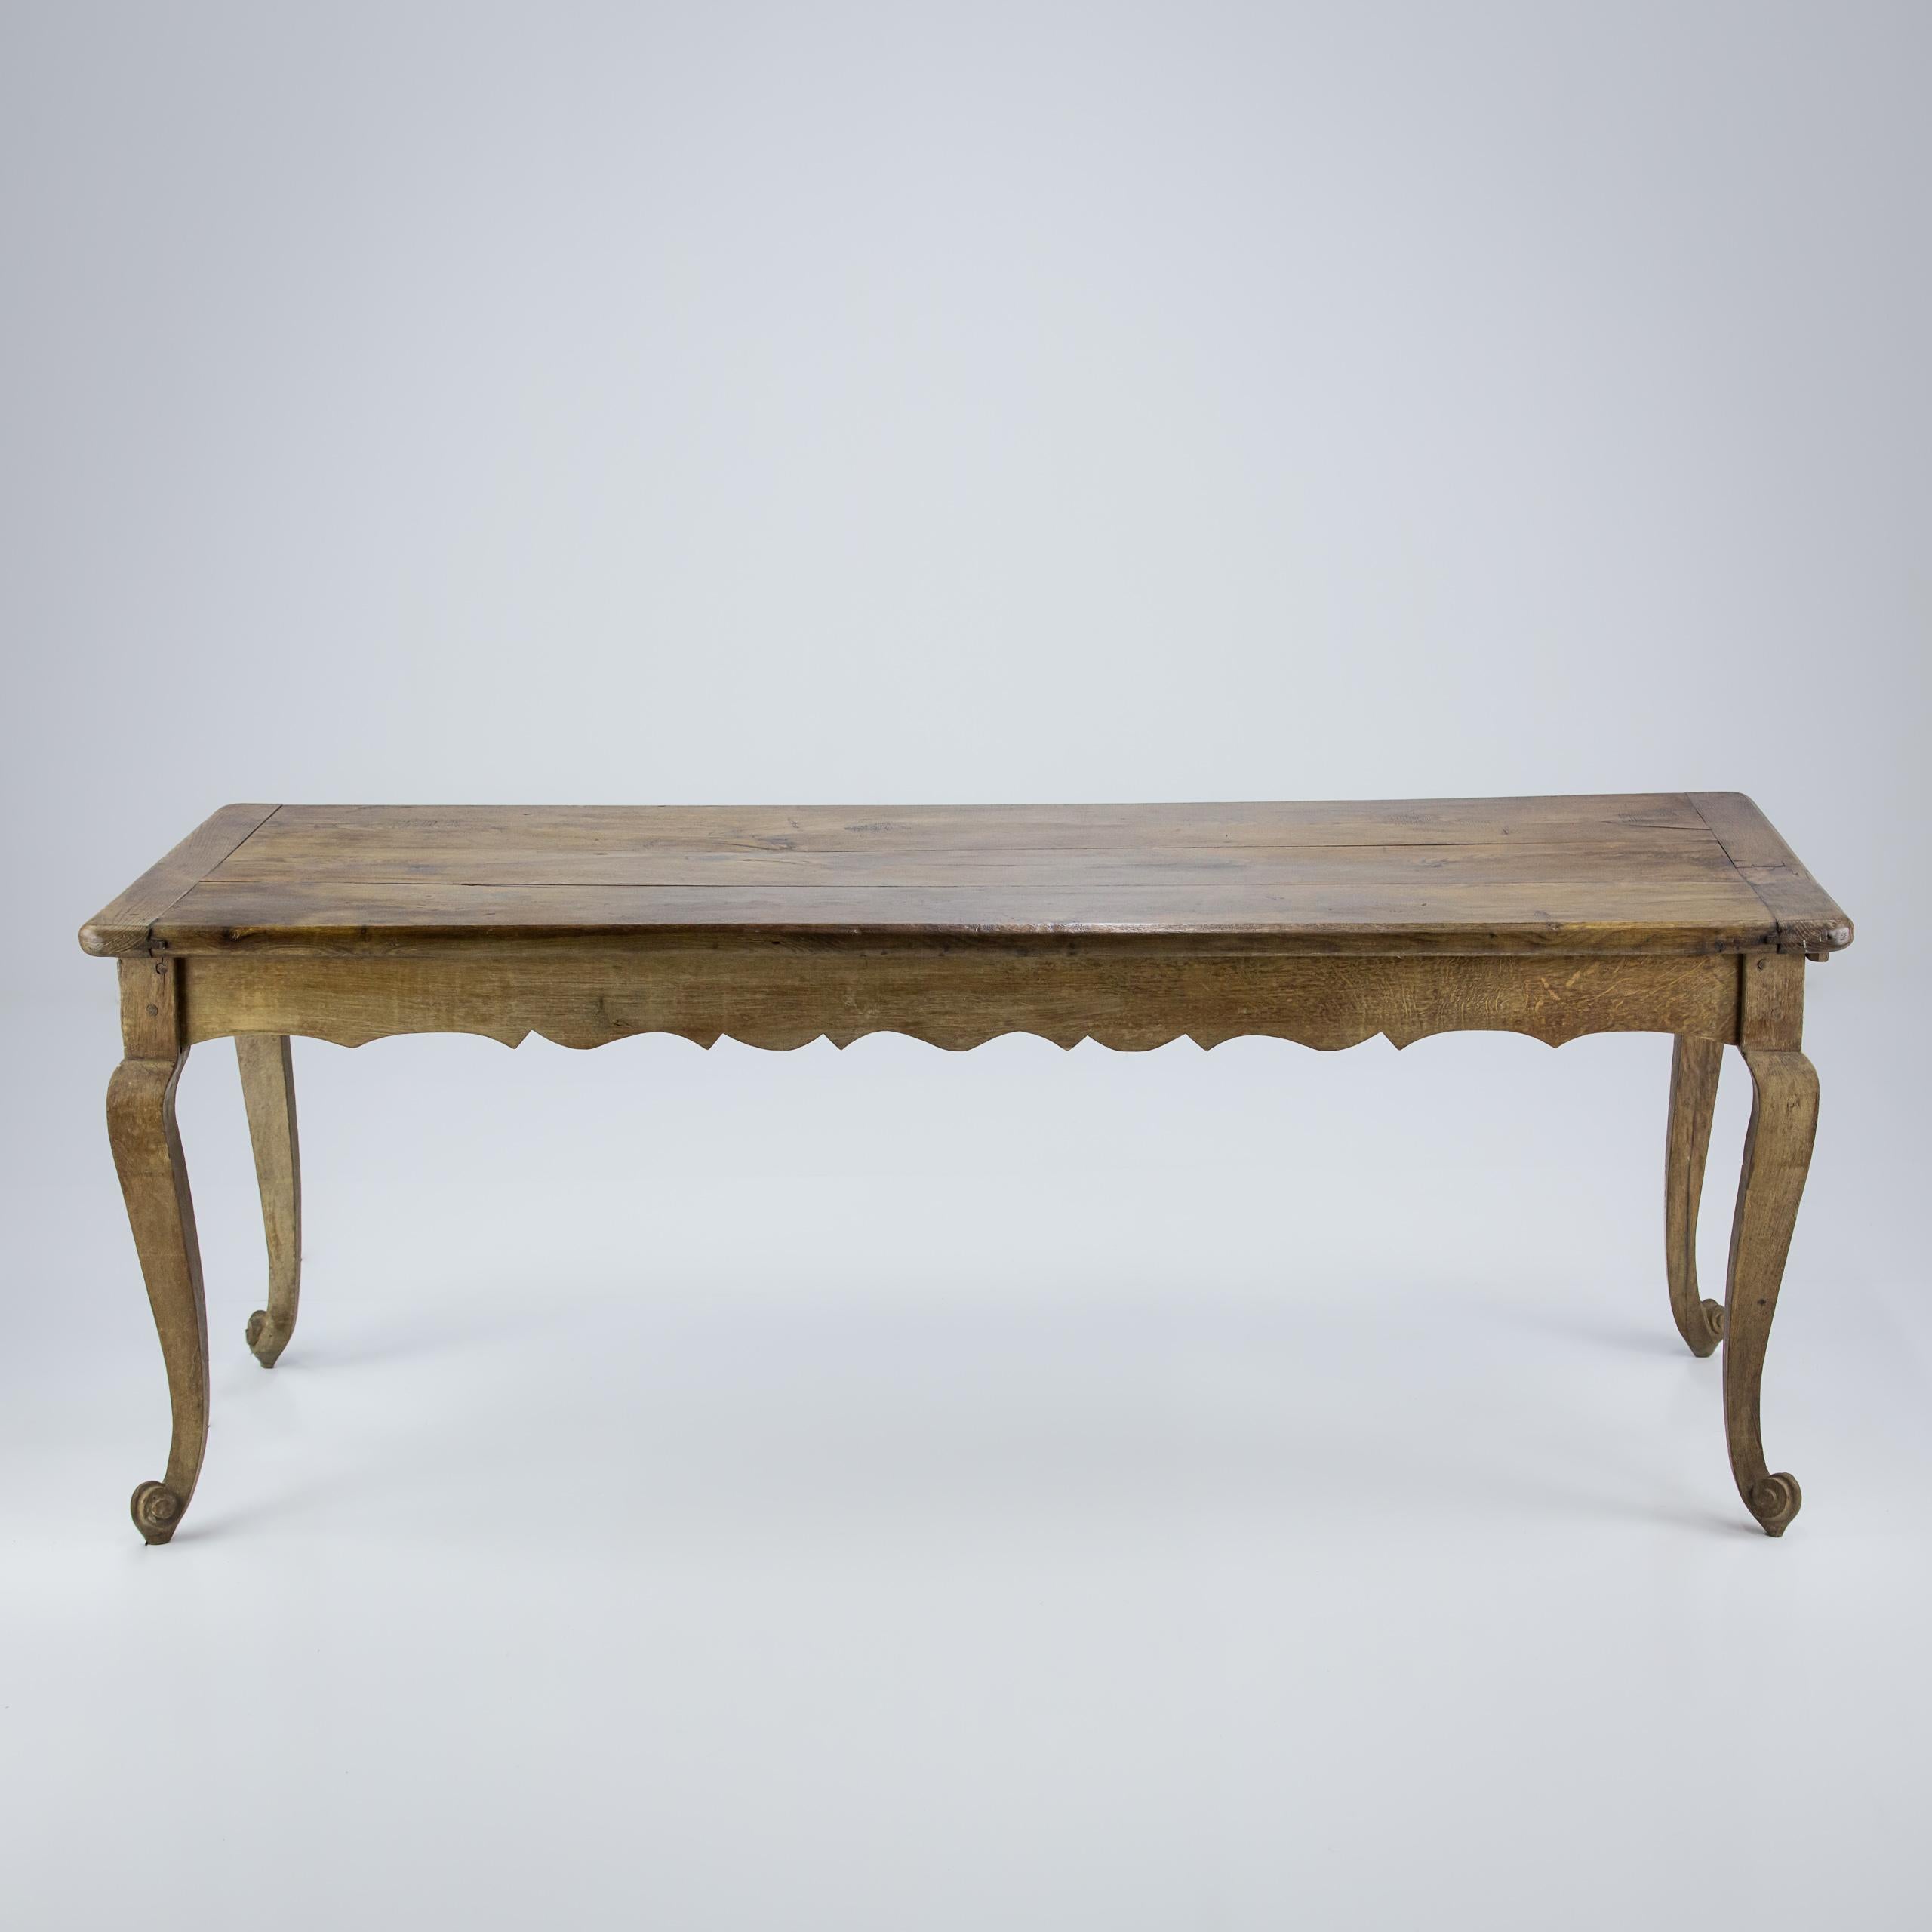 Impressive Louis XV style Country Farmhouse Table. Impressive Scroll foot and Cabriole leg. Robust, Thicker than expected three piece top with cleated ends showing pleasing shrinkage. Well proportioned, elegant underskirt. Good patination and wear.